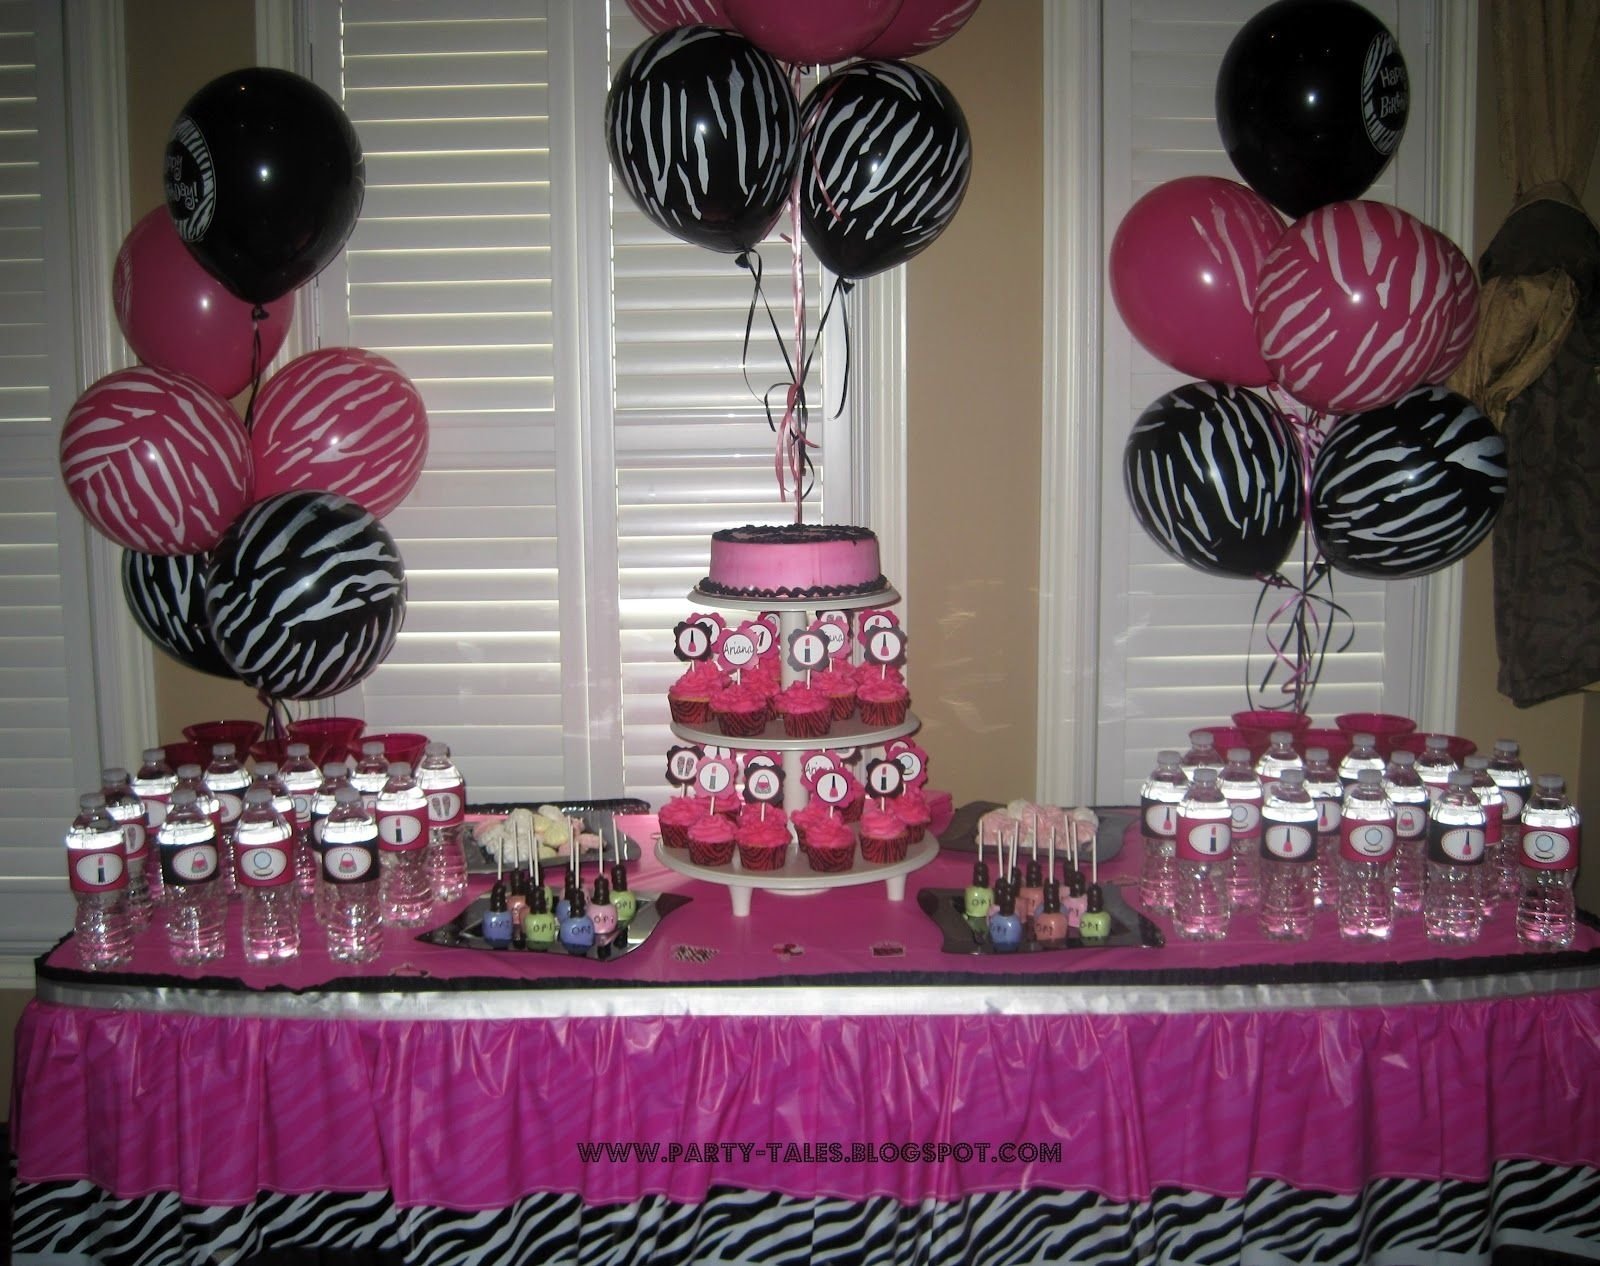 10 Ideal Pink And Zebra Party Ideas party tales birthday party zebra print and hot pink diva spa 6 2022